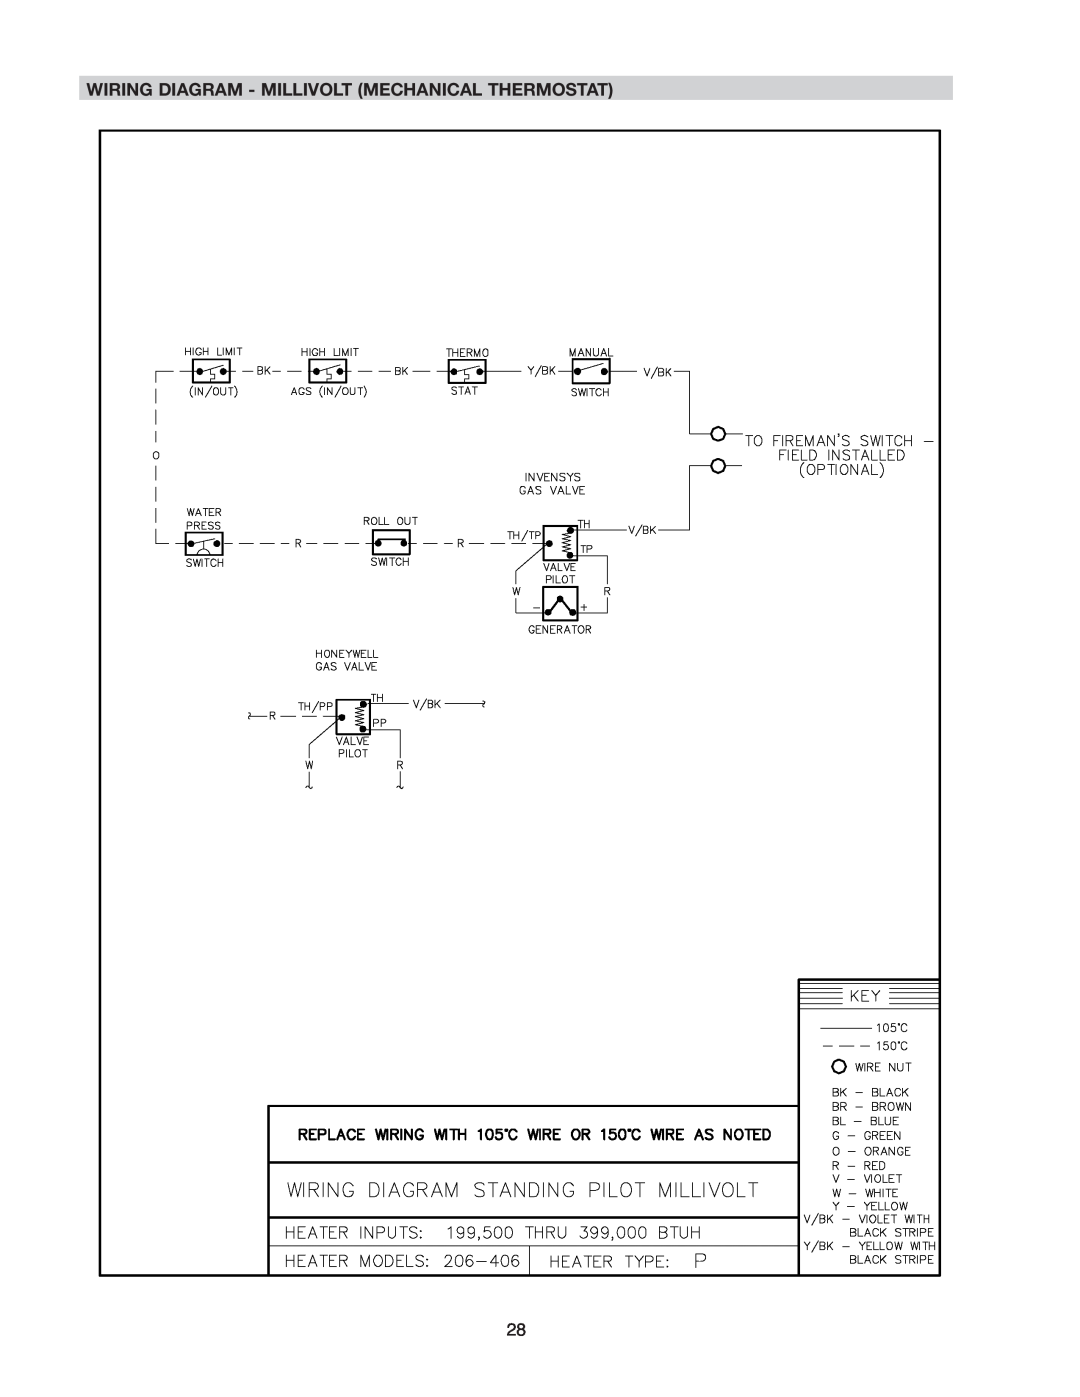 Raypak 336A, 406A, 206A, 407A, 337A, 207A, 267A, 266A operating instructions Wiring Diagram - Millivolt Mechanical Thermostat 